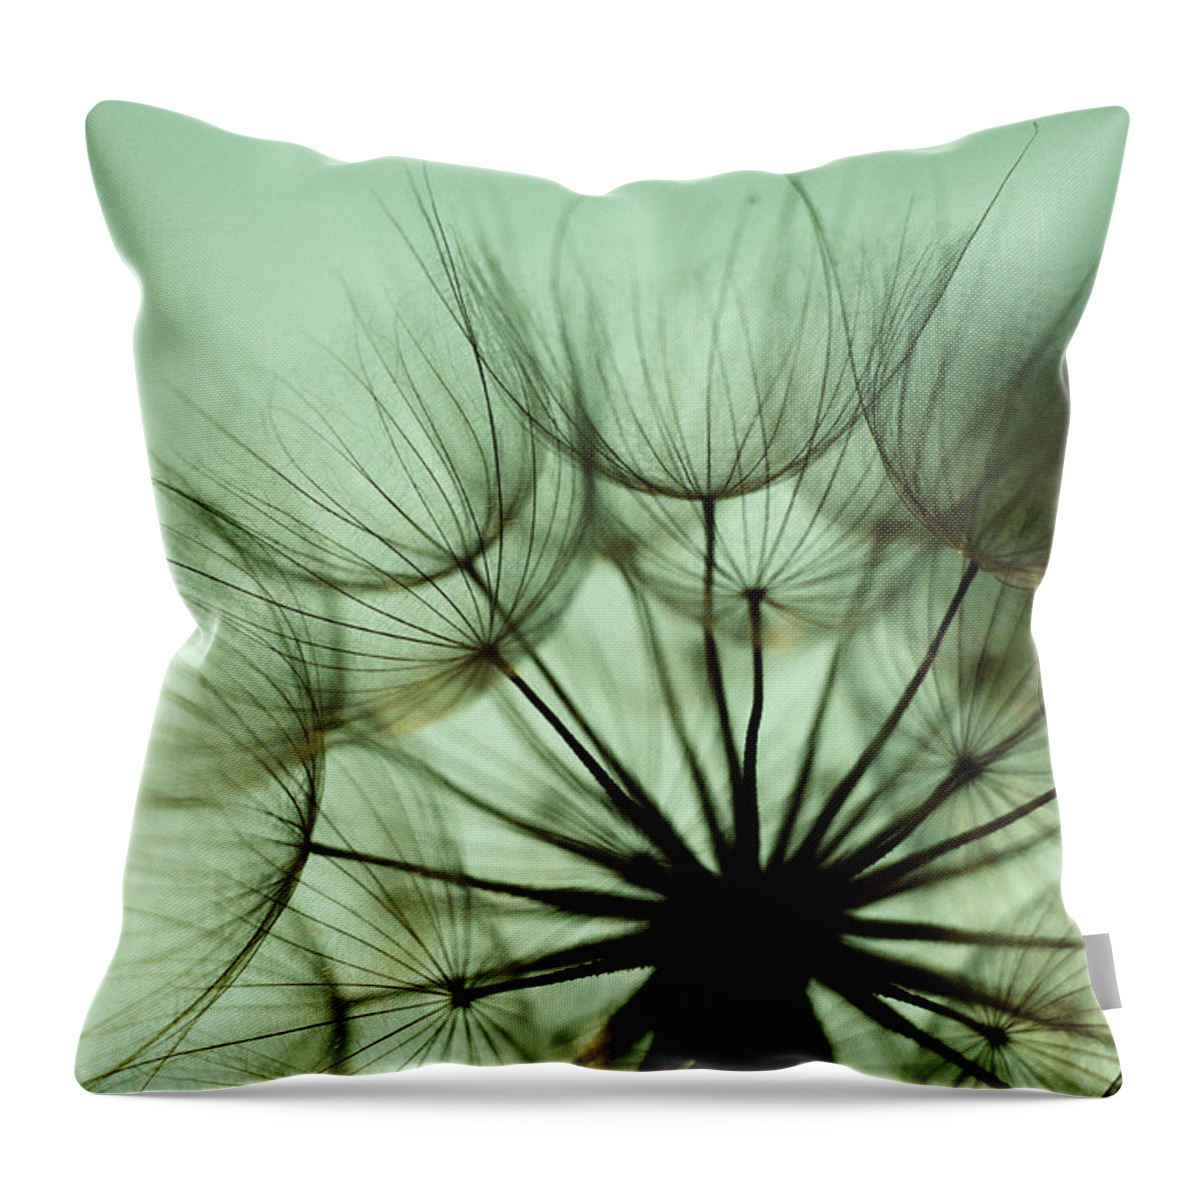 Outdoors Throw Pillow featuring the photograph Close-up Of Dandelion Seeds by Jupiterimages